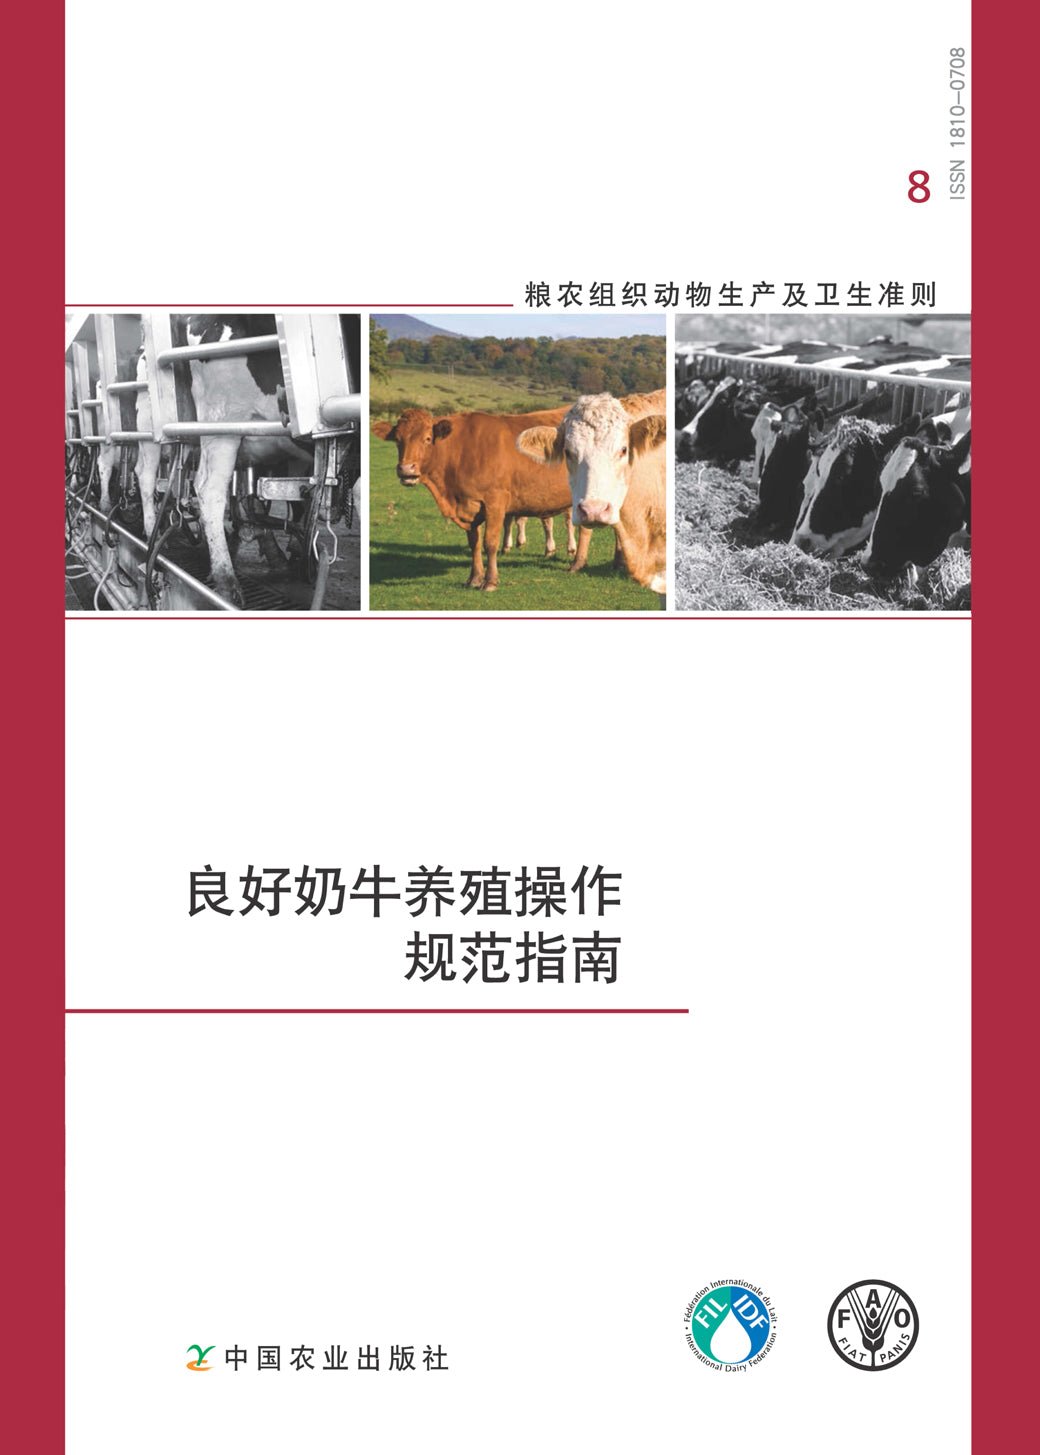 Guide to Good Dairy Farming Practice in Chinese (2011) - FIL-IDF